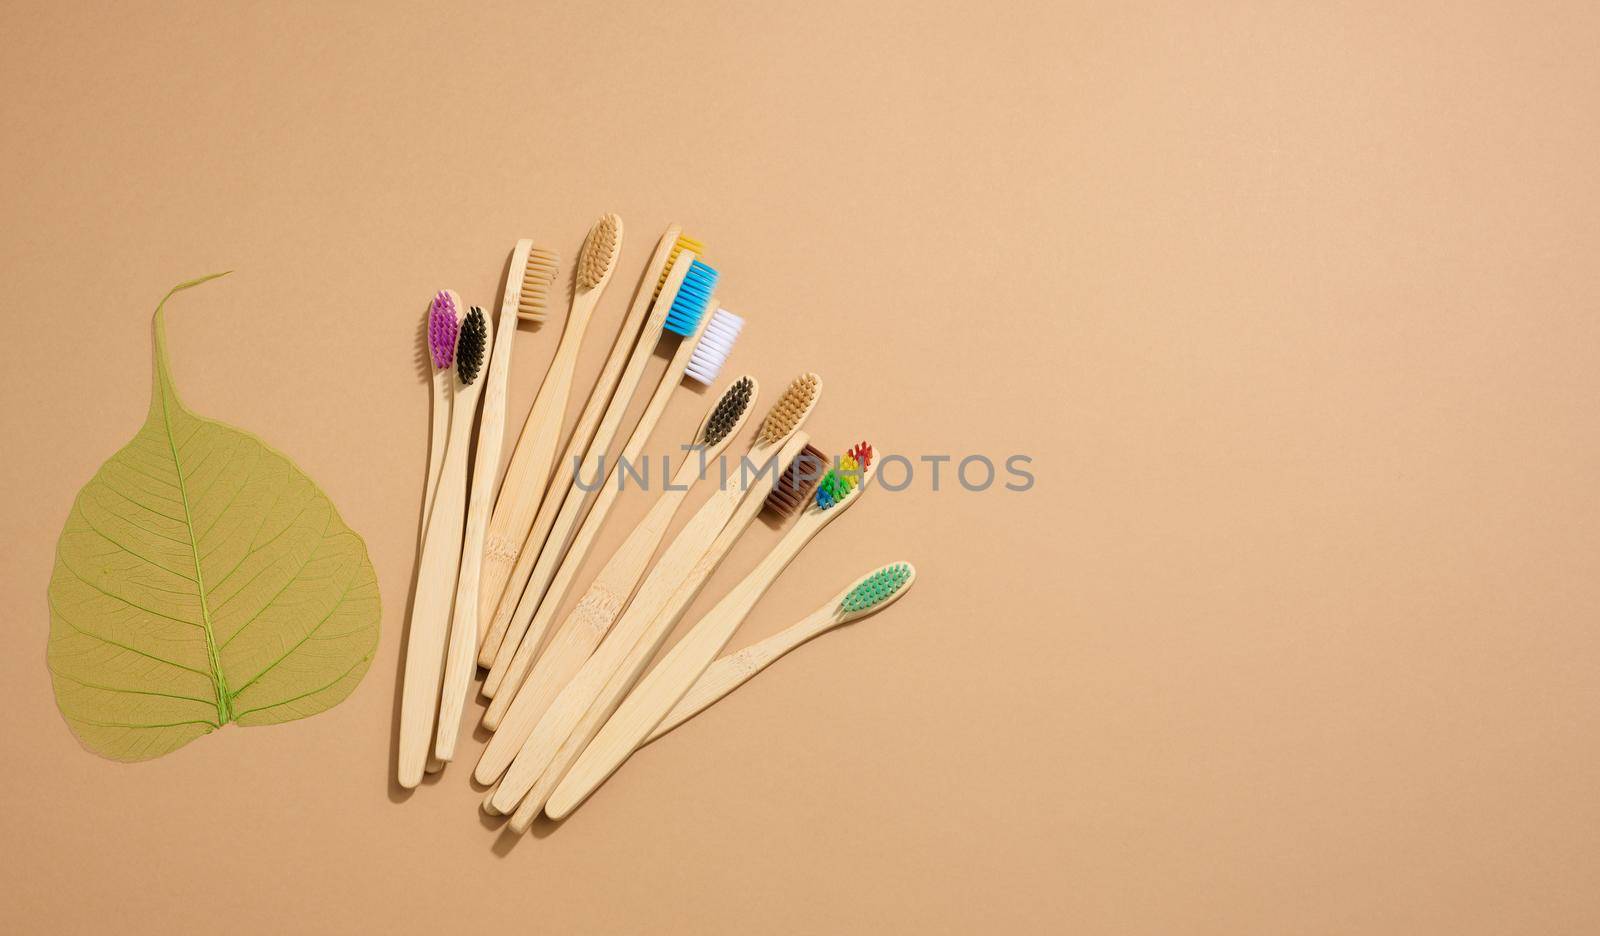 multicolored wooden toothbrushes on a brown background, plastic rejection concept, zero waste, top view by ndanko